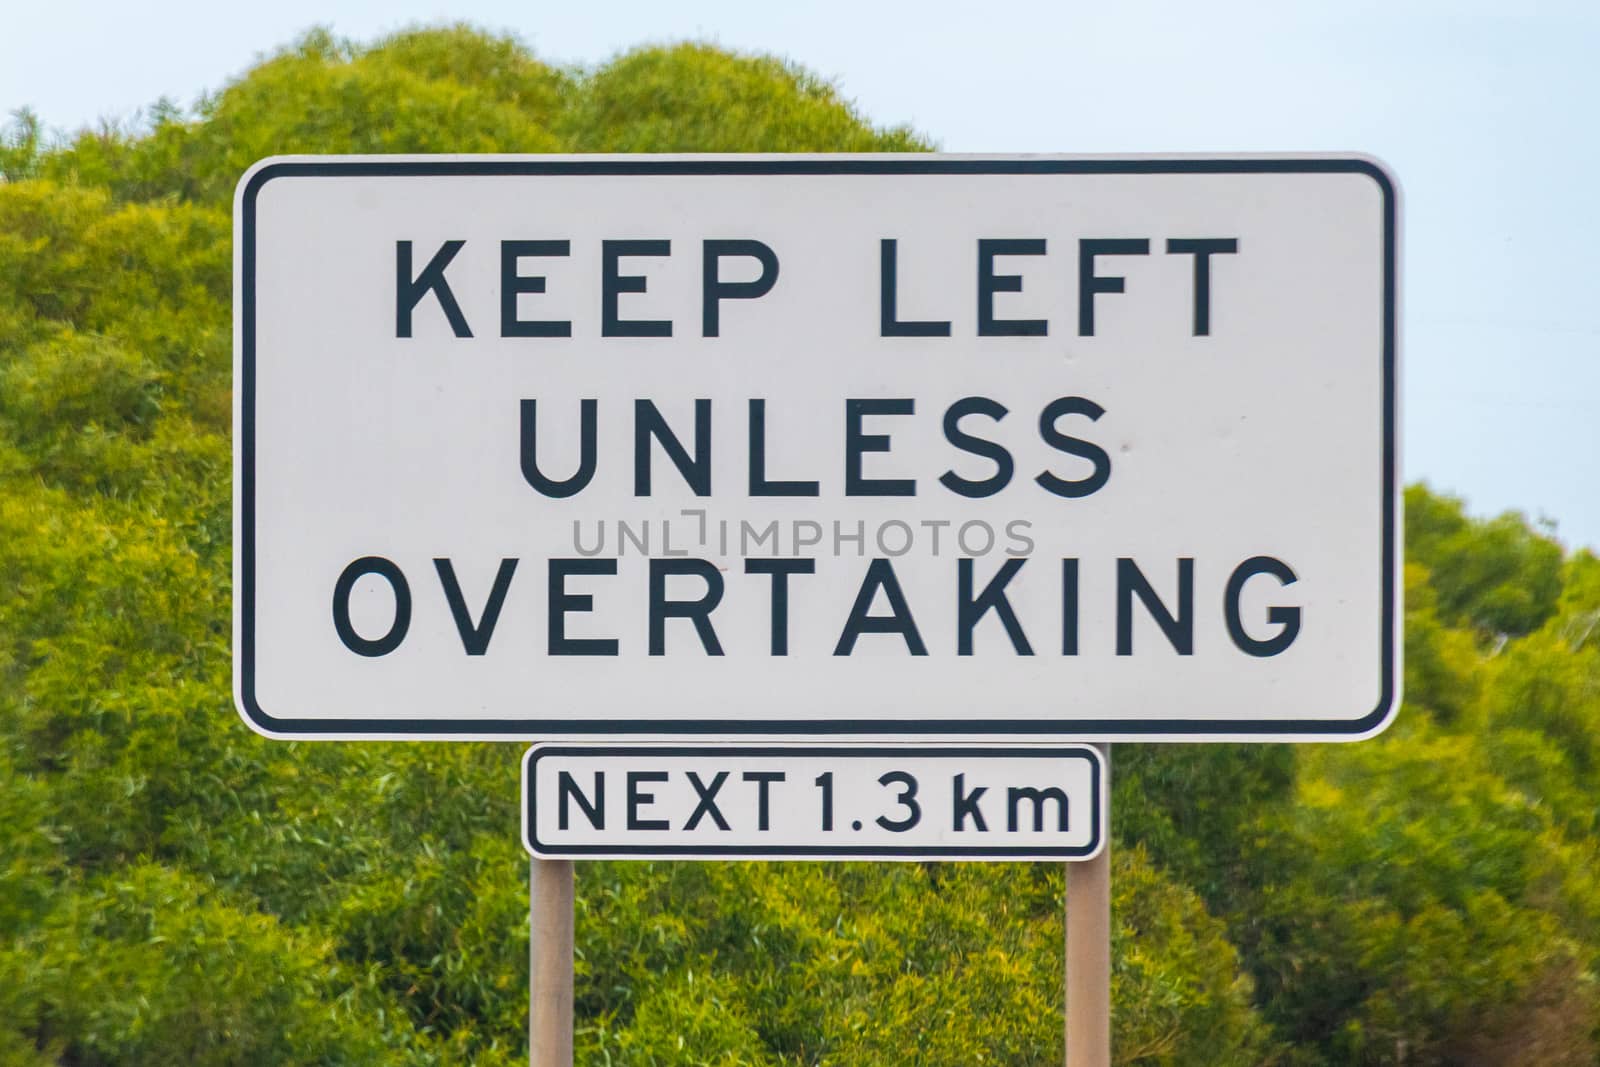 Keep left unless overtaking street sign in Australia by MXW_Stock